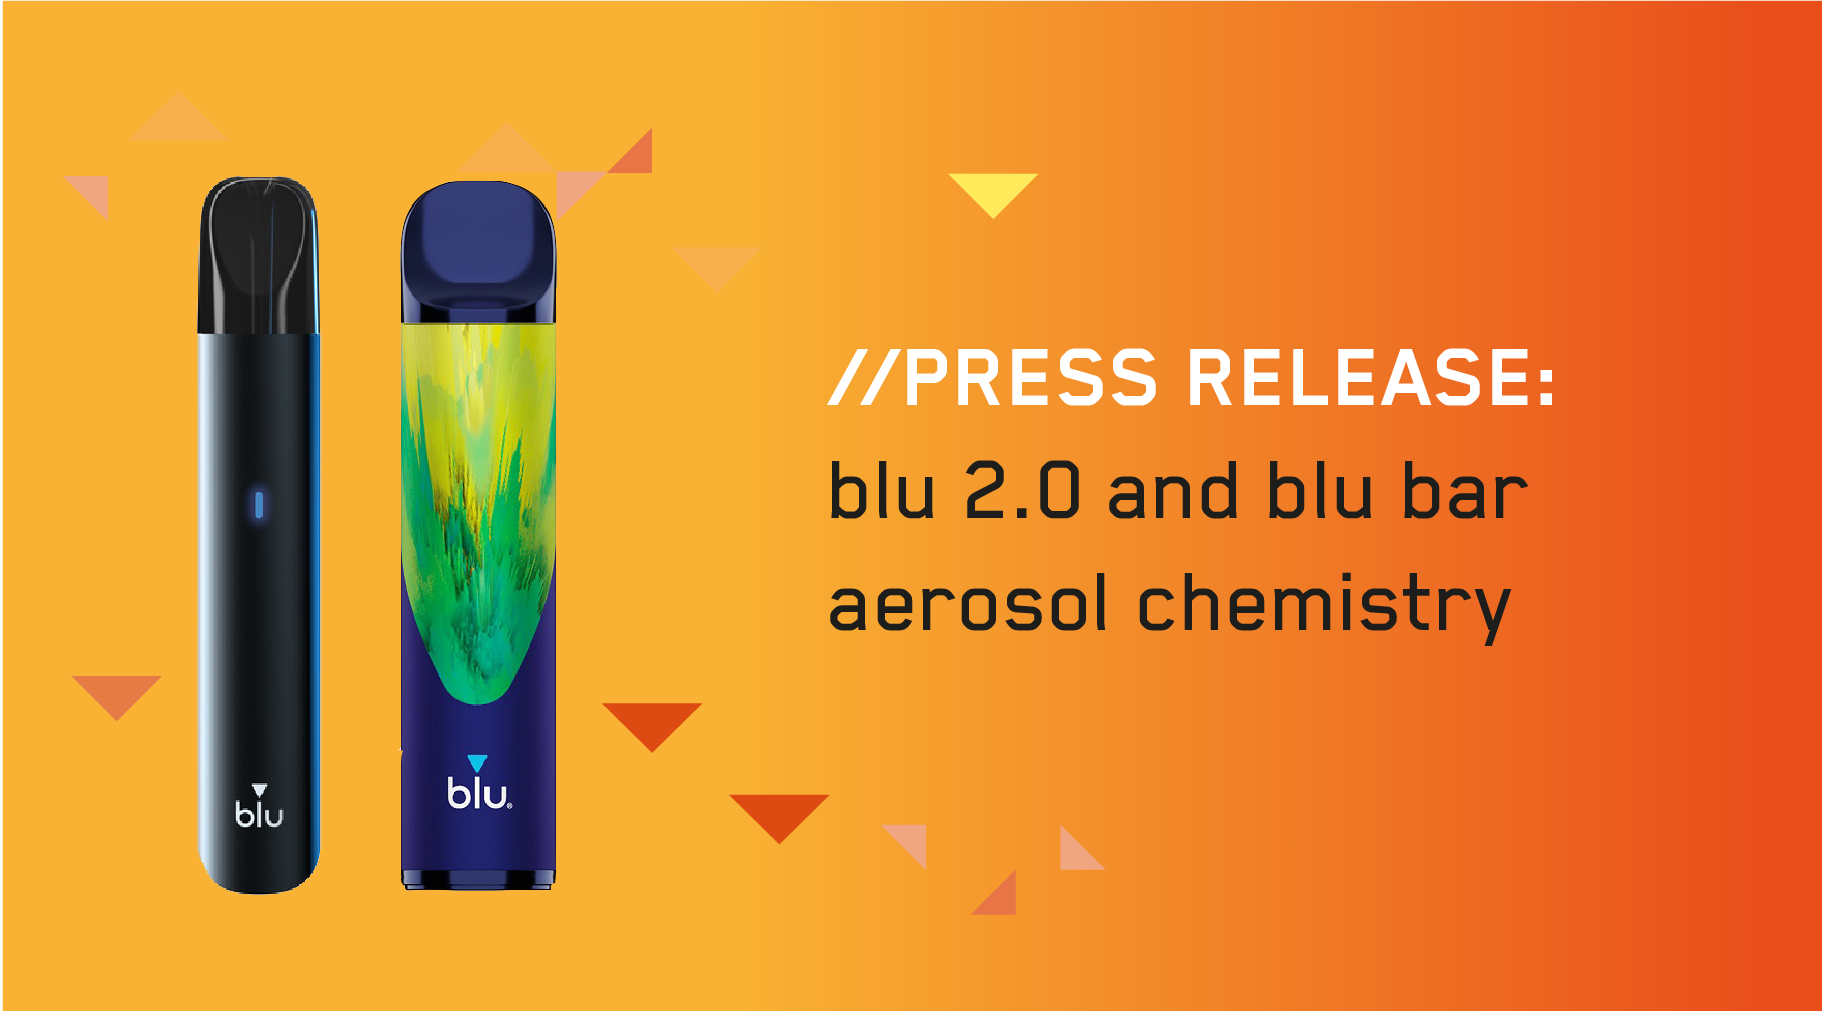 NEW RESEARCH: SIGNIFICANTLY LOWER LEVELS OF HARMFUL CHEMICALS IN BLU 2.0 AND BLU BAR VAPOUR COMPARED TO CIGARETTE SMOKE